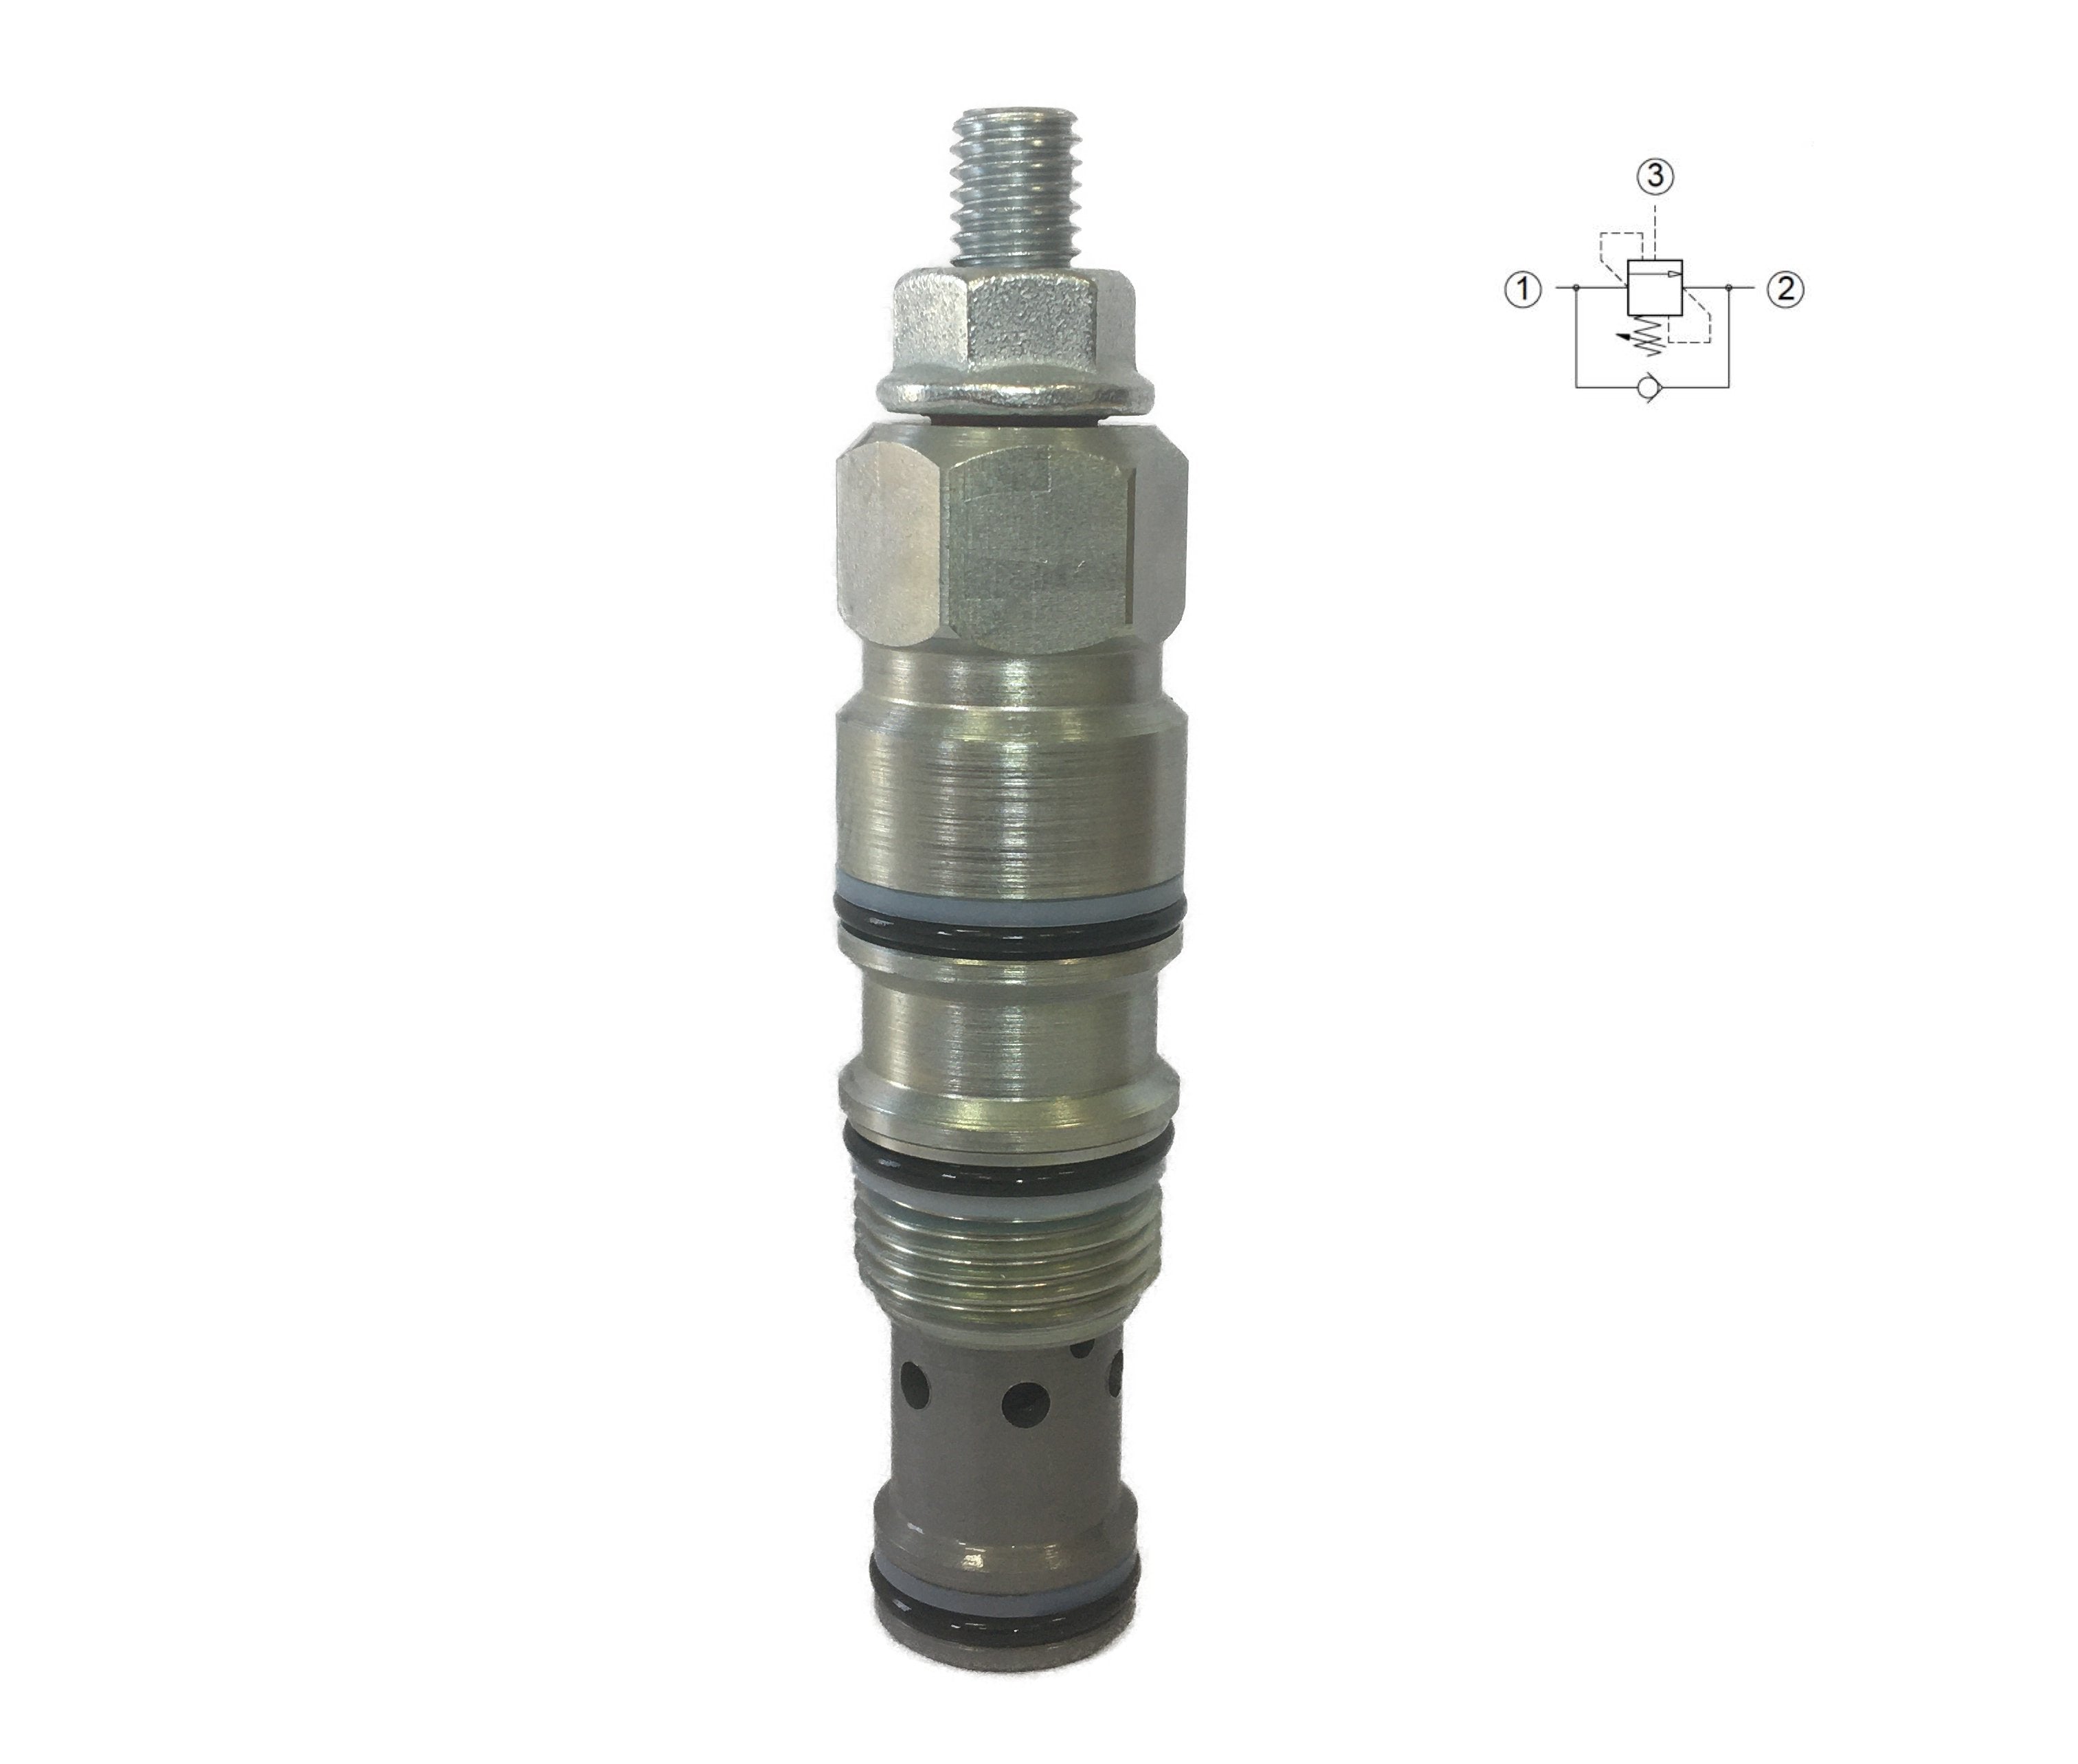 C000T090031100A : Valvole Counterbalance, 3:1, 16 GPM, 5000psi, 507 to 1522psi adjustable, 1305psi Preset, T-11A